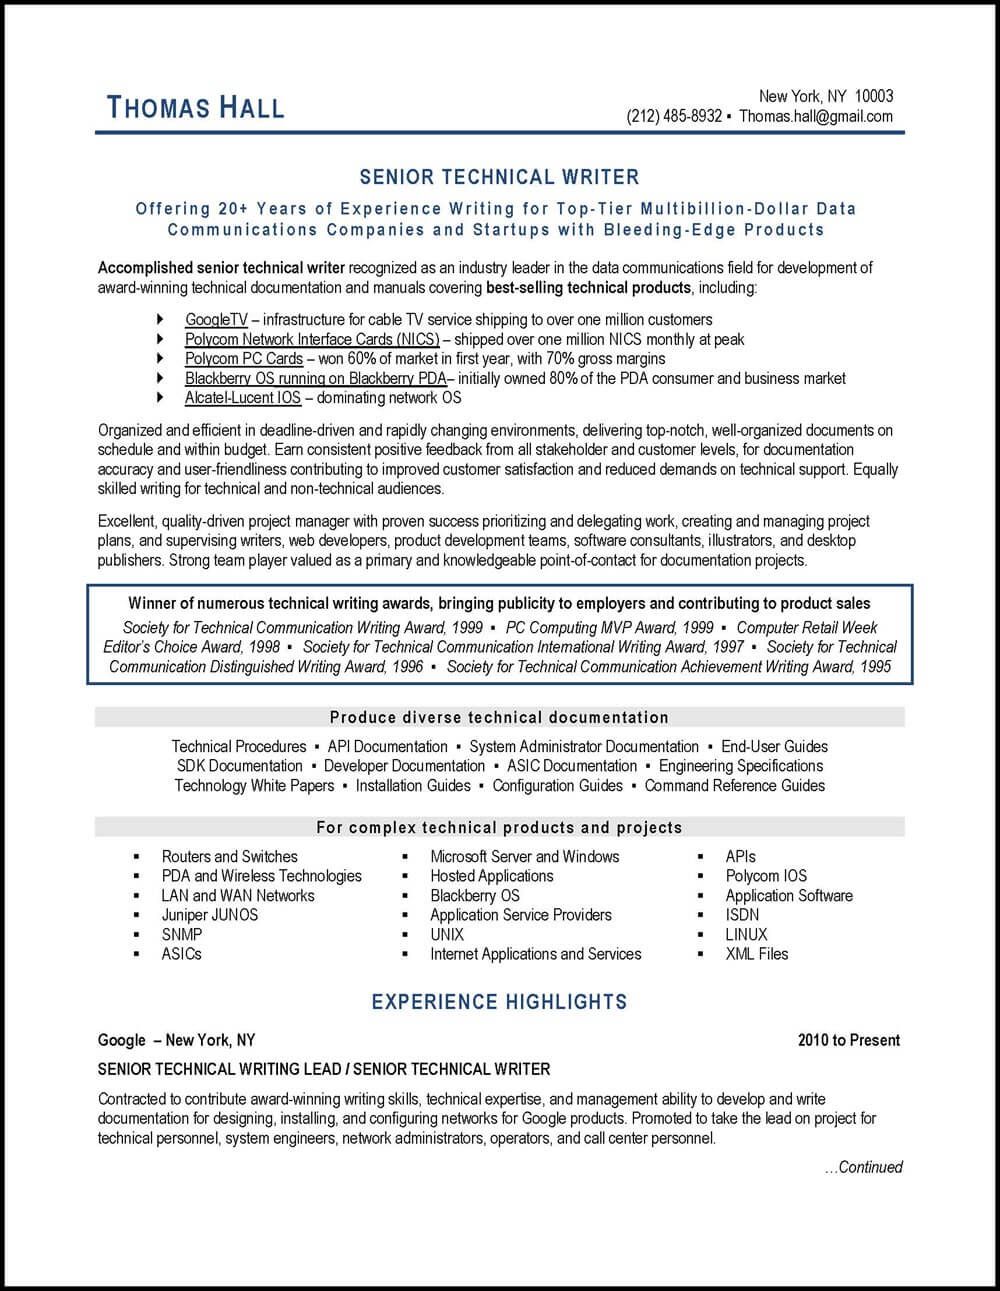 This Technical Writer Resume Example Illustrates Many Best Practices Of Resume Writing With An Eye Cat Technical Writer Resume Examples Resume Writing Services